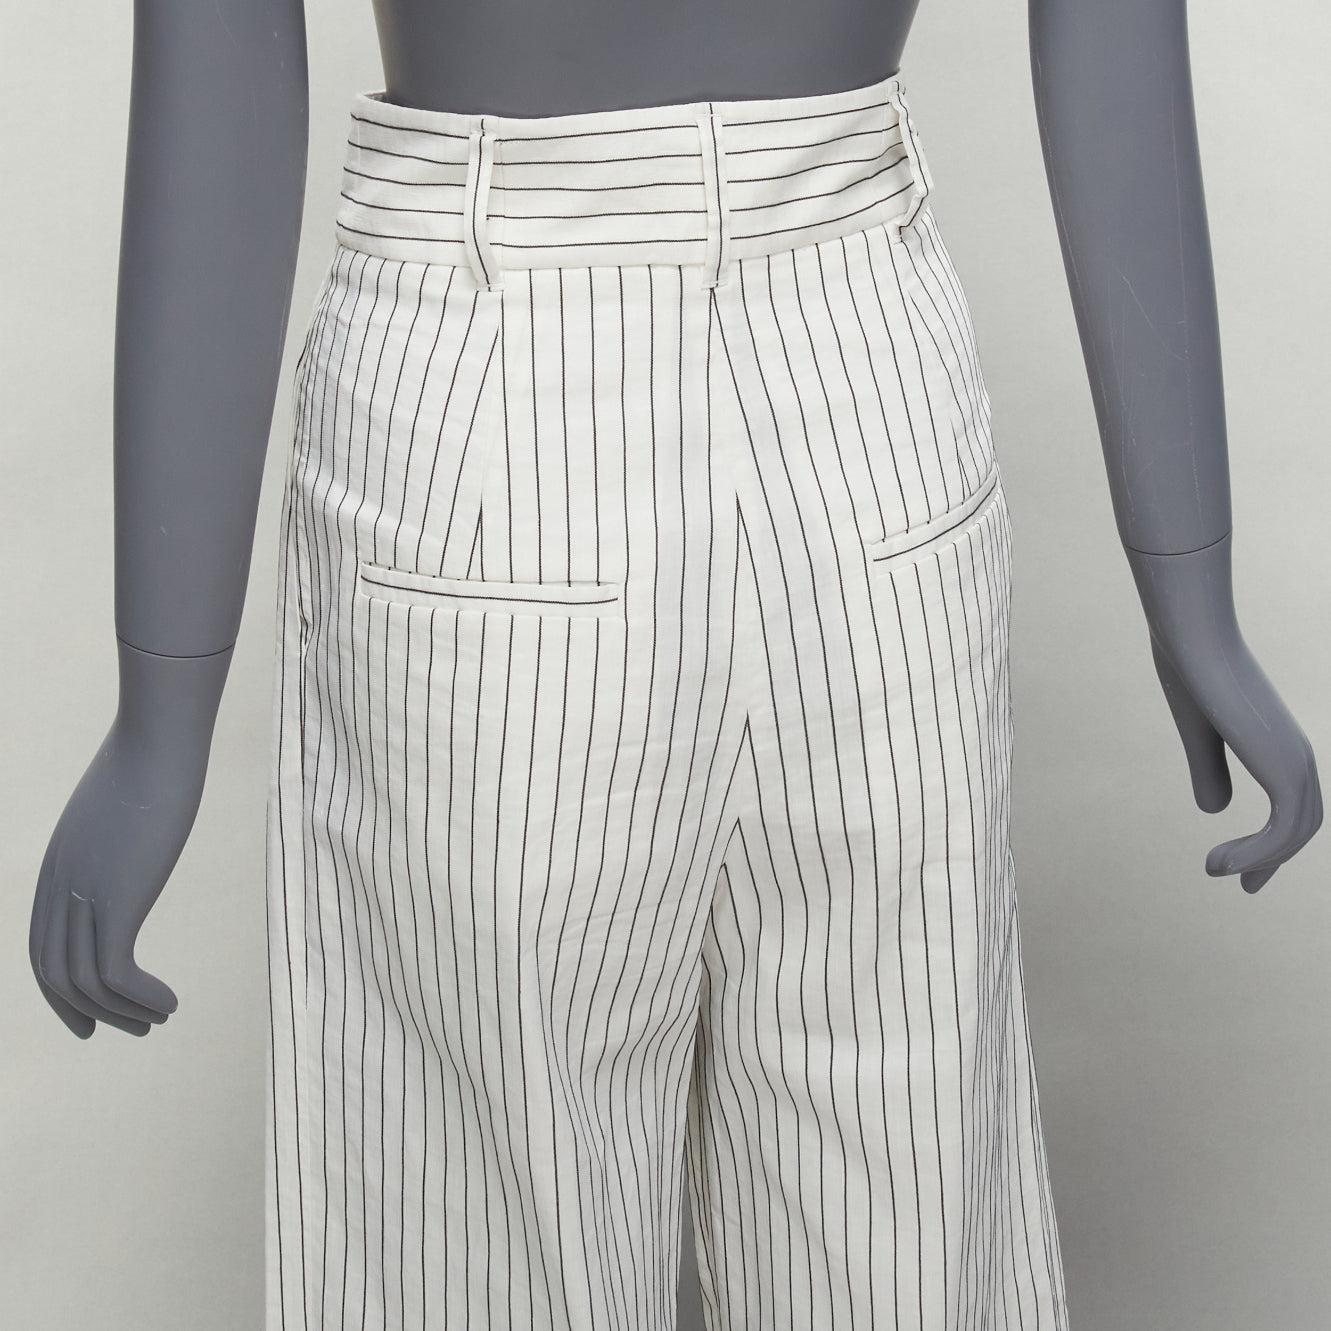 TIBI white black pinstriped linen blend pleated front wide leg cropped pants US0 XS
Reference: SNKO/A00409
Brand: Tibi
Material: Linen, Blend
Color: White, Black
Pattern: Pinstriped
Closure: Zip Fly
Lining: White Fabric
Extra Details: 2 pockets at